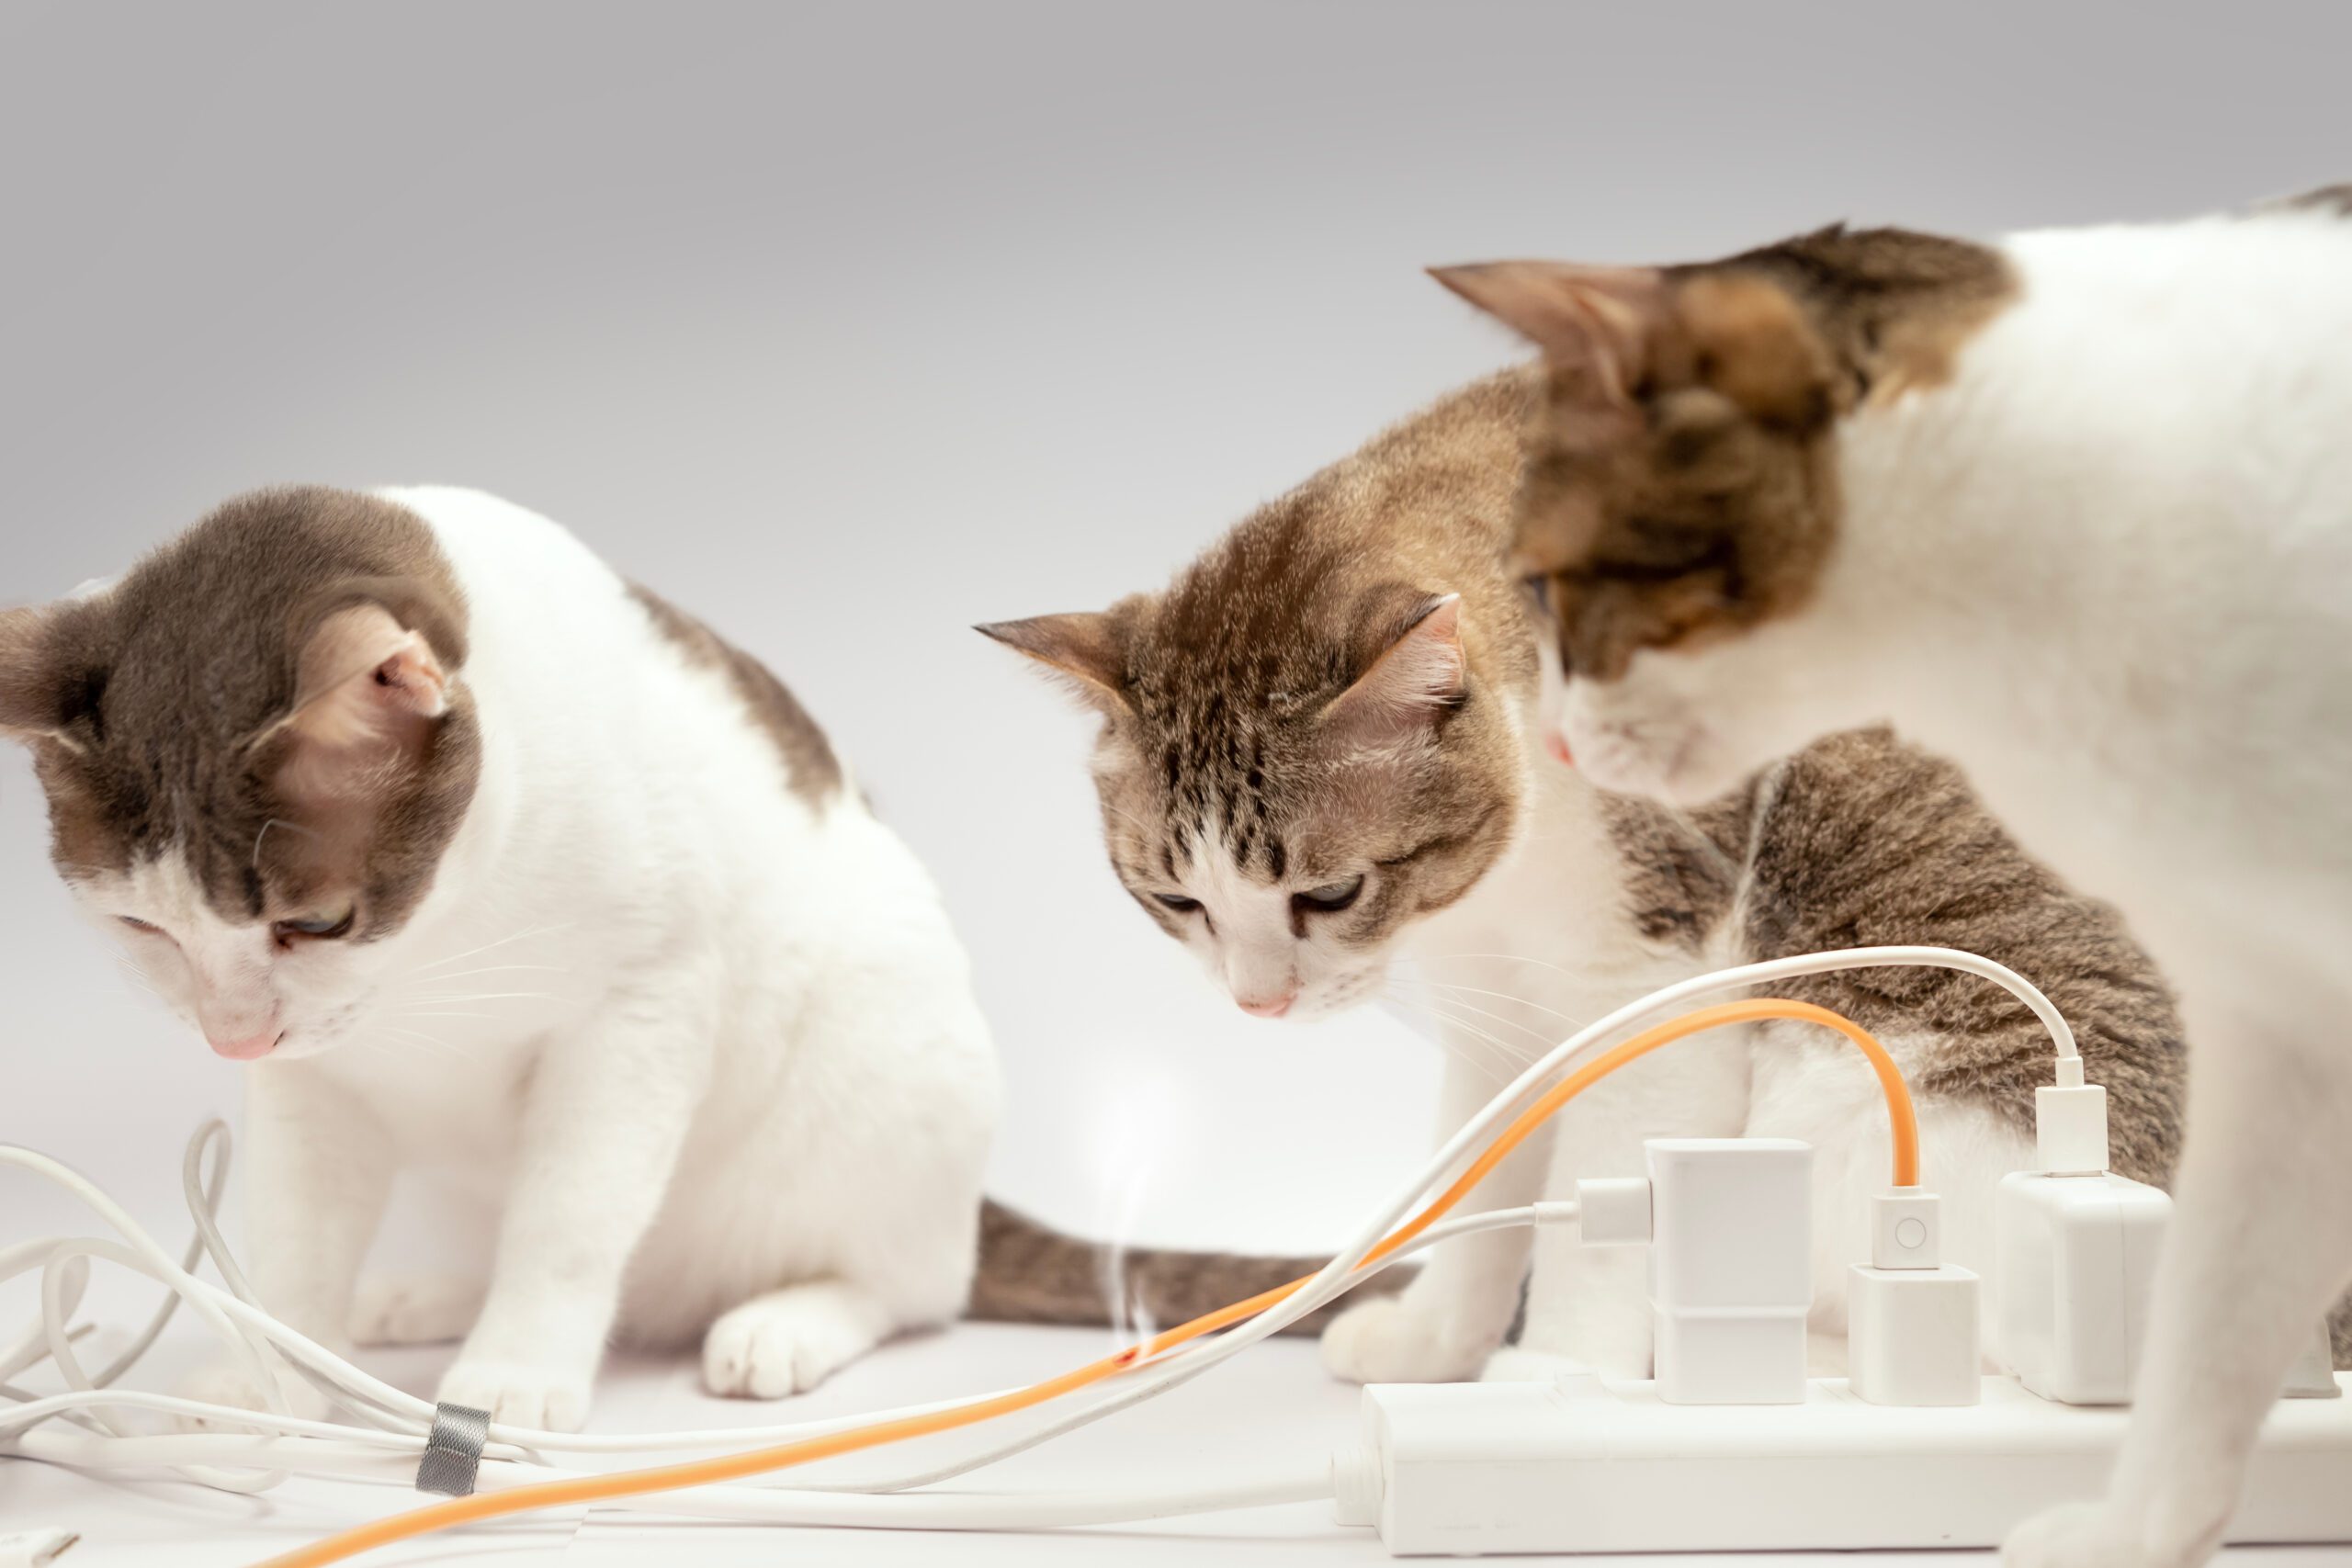 Cord management is crucial when pet proofing your home